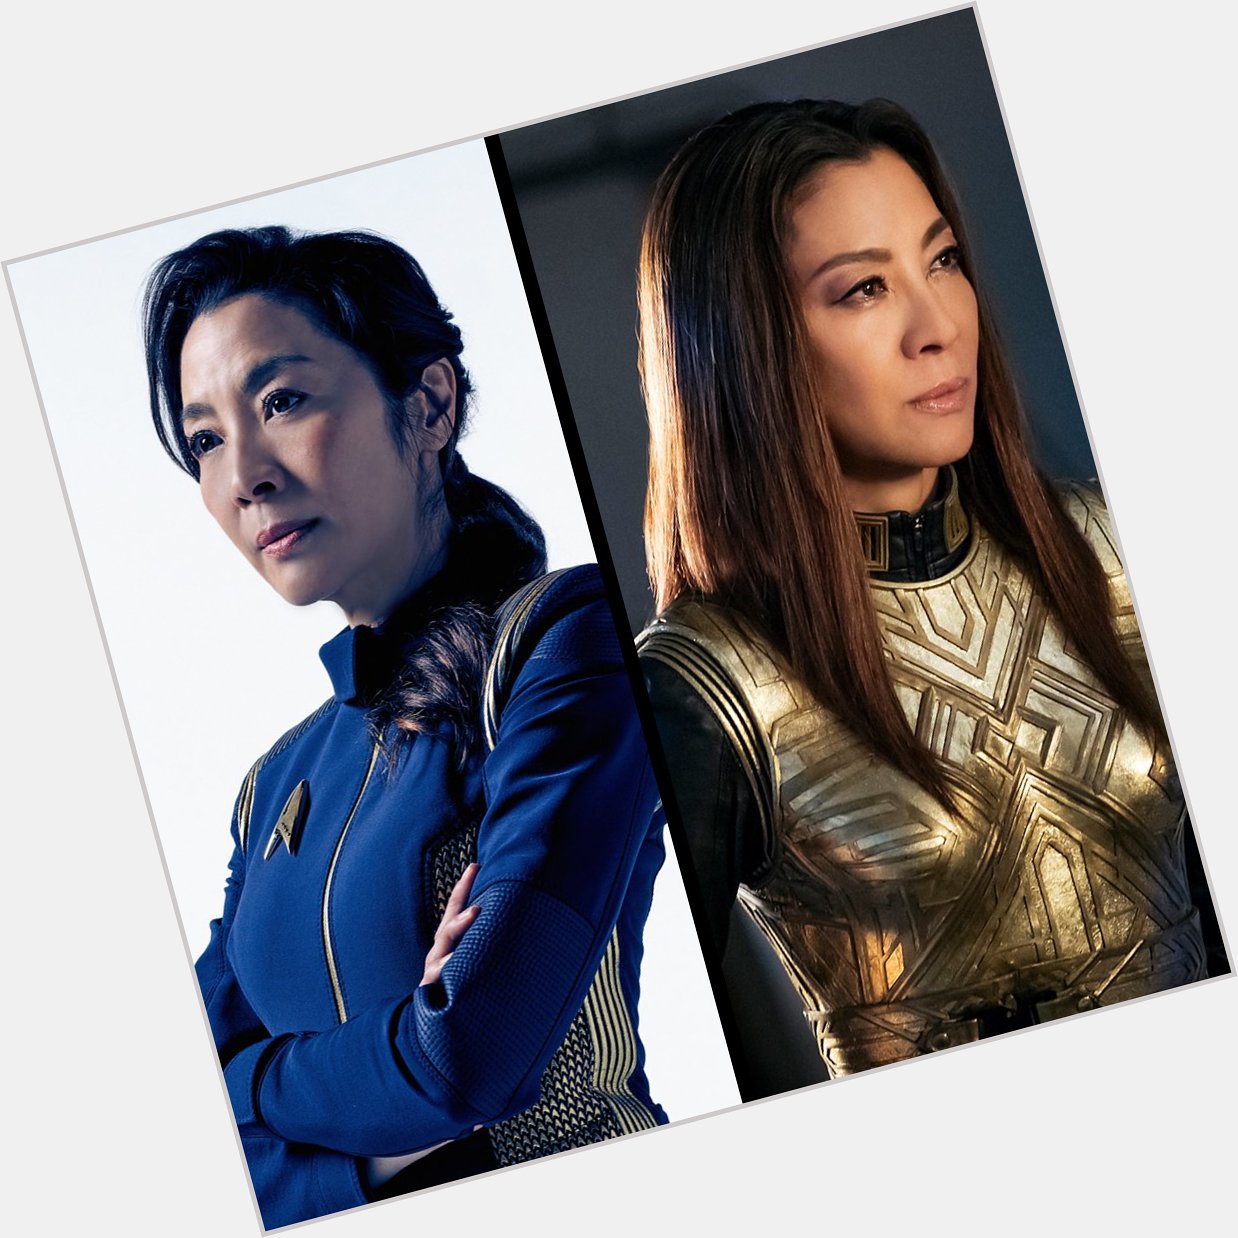 Happy Birthday to Michelle Yeoh! What are your predictions for her character in season 2 of 